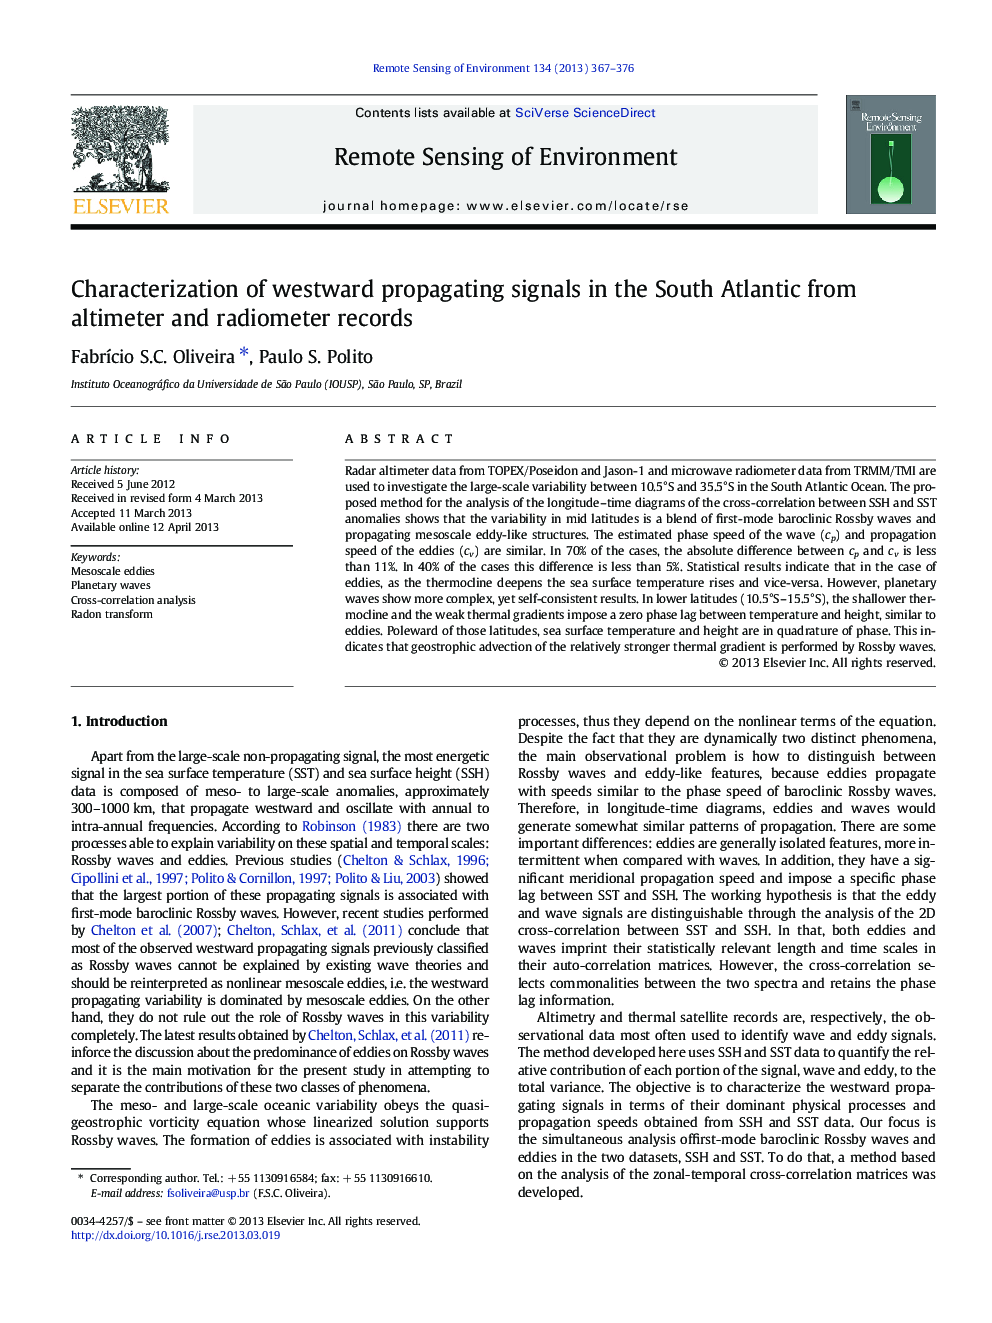 Characterization of westward propagating signals in the South Atlantic from altimeter and radiometer records